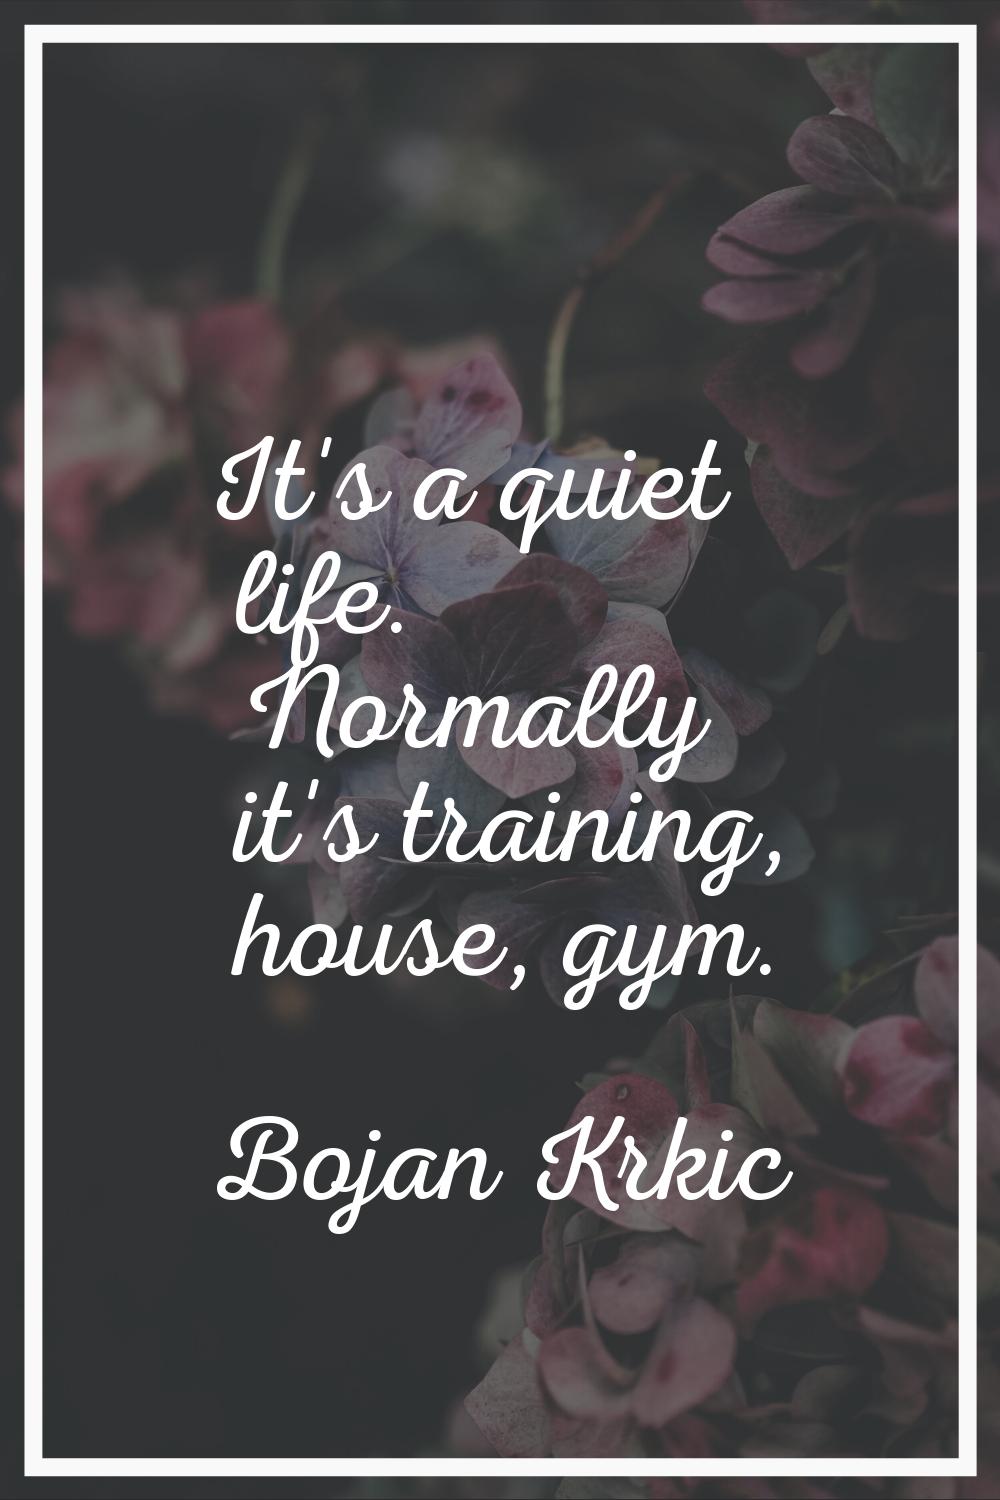 It's a quiet life. Normally it's training, house, gym.